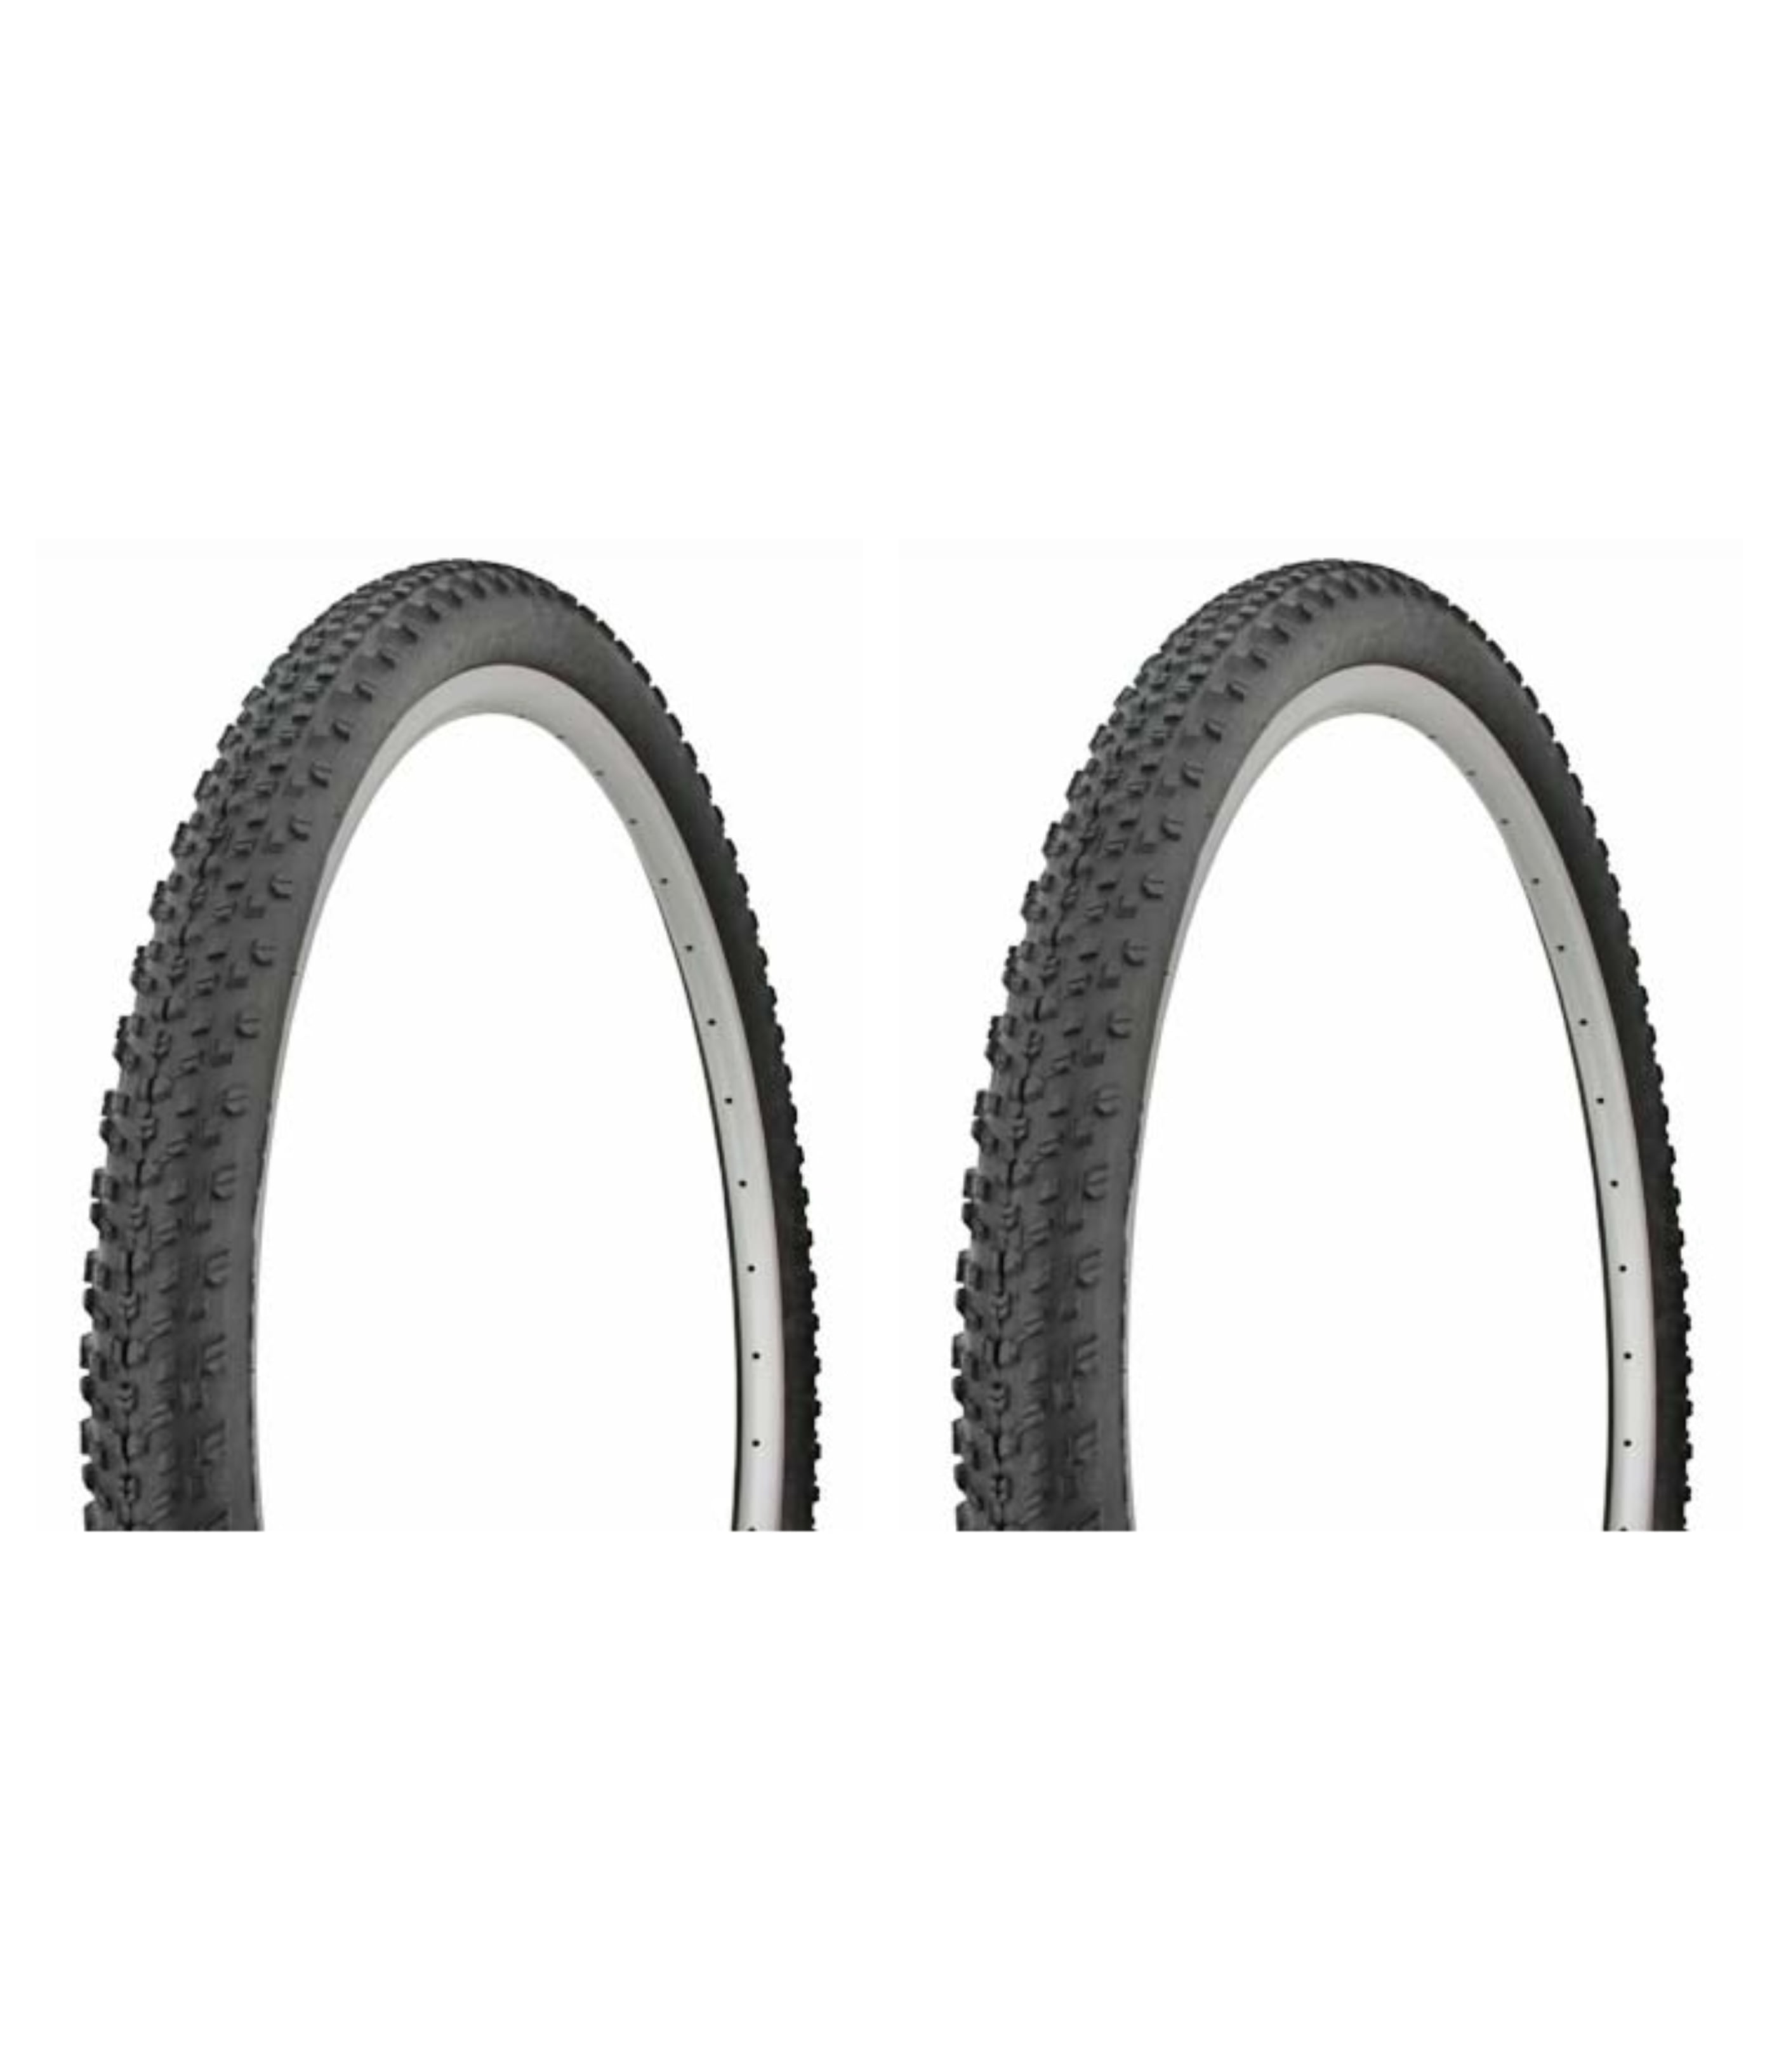 2 Inner Tubes 2 of Bike Bicycle Tire Duro 26" x 2.10" All Black DB-1072 Pair 